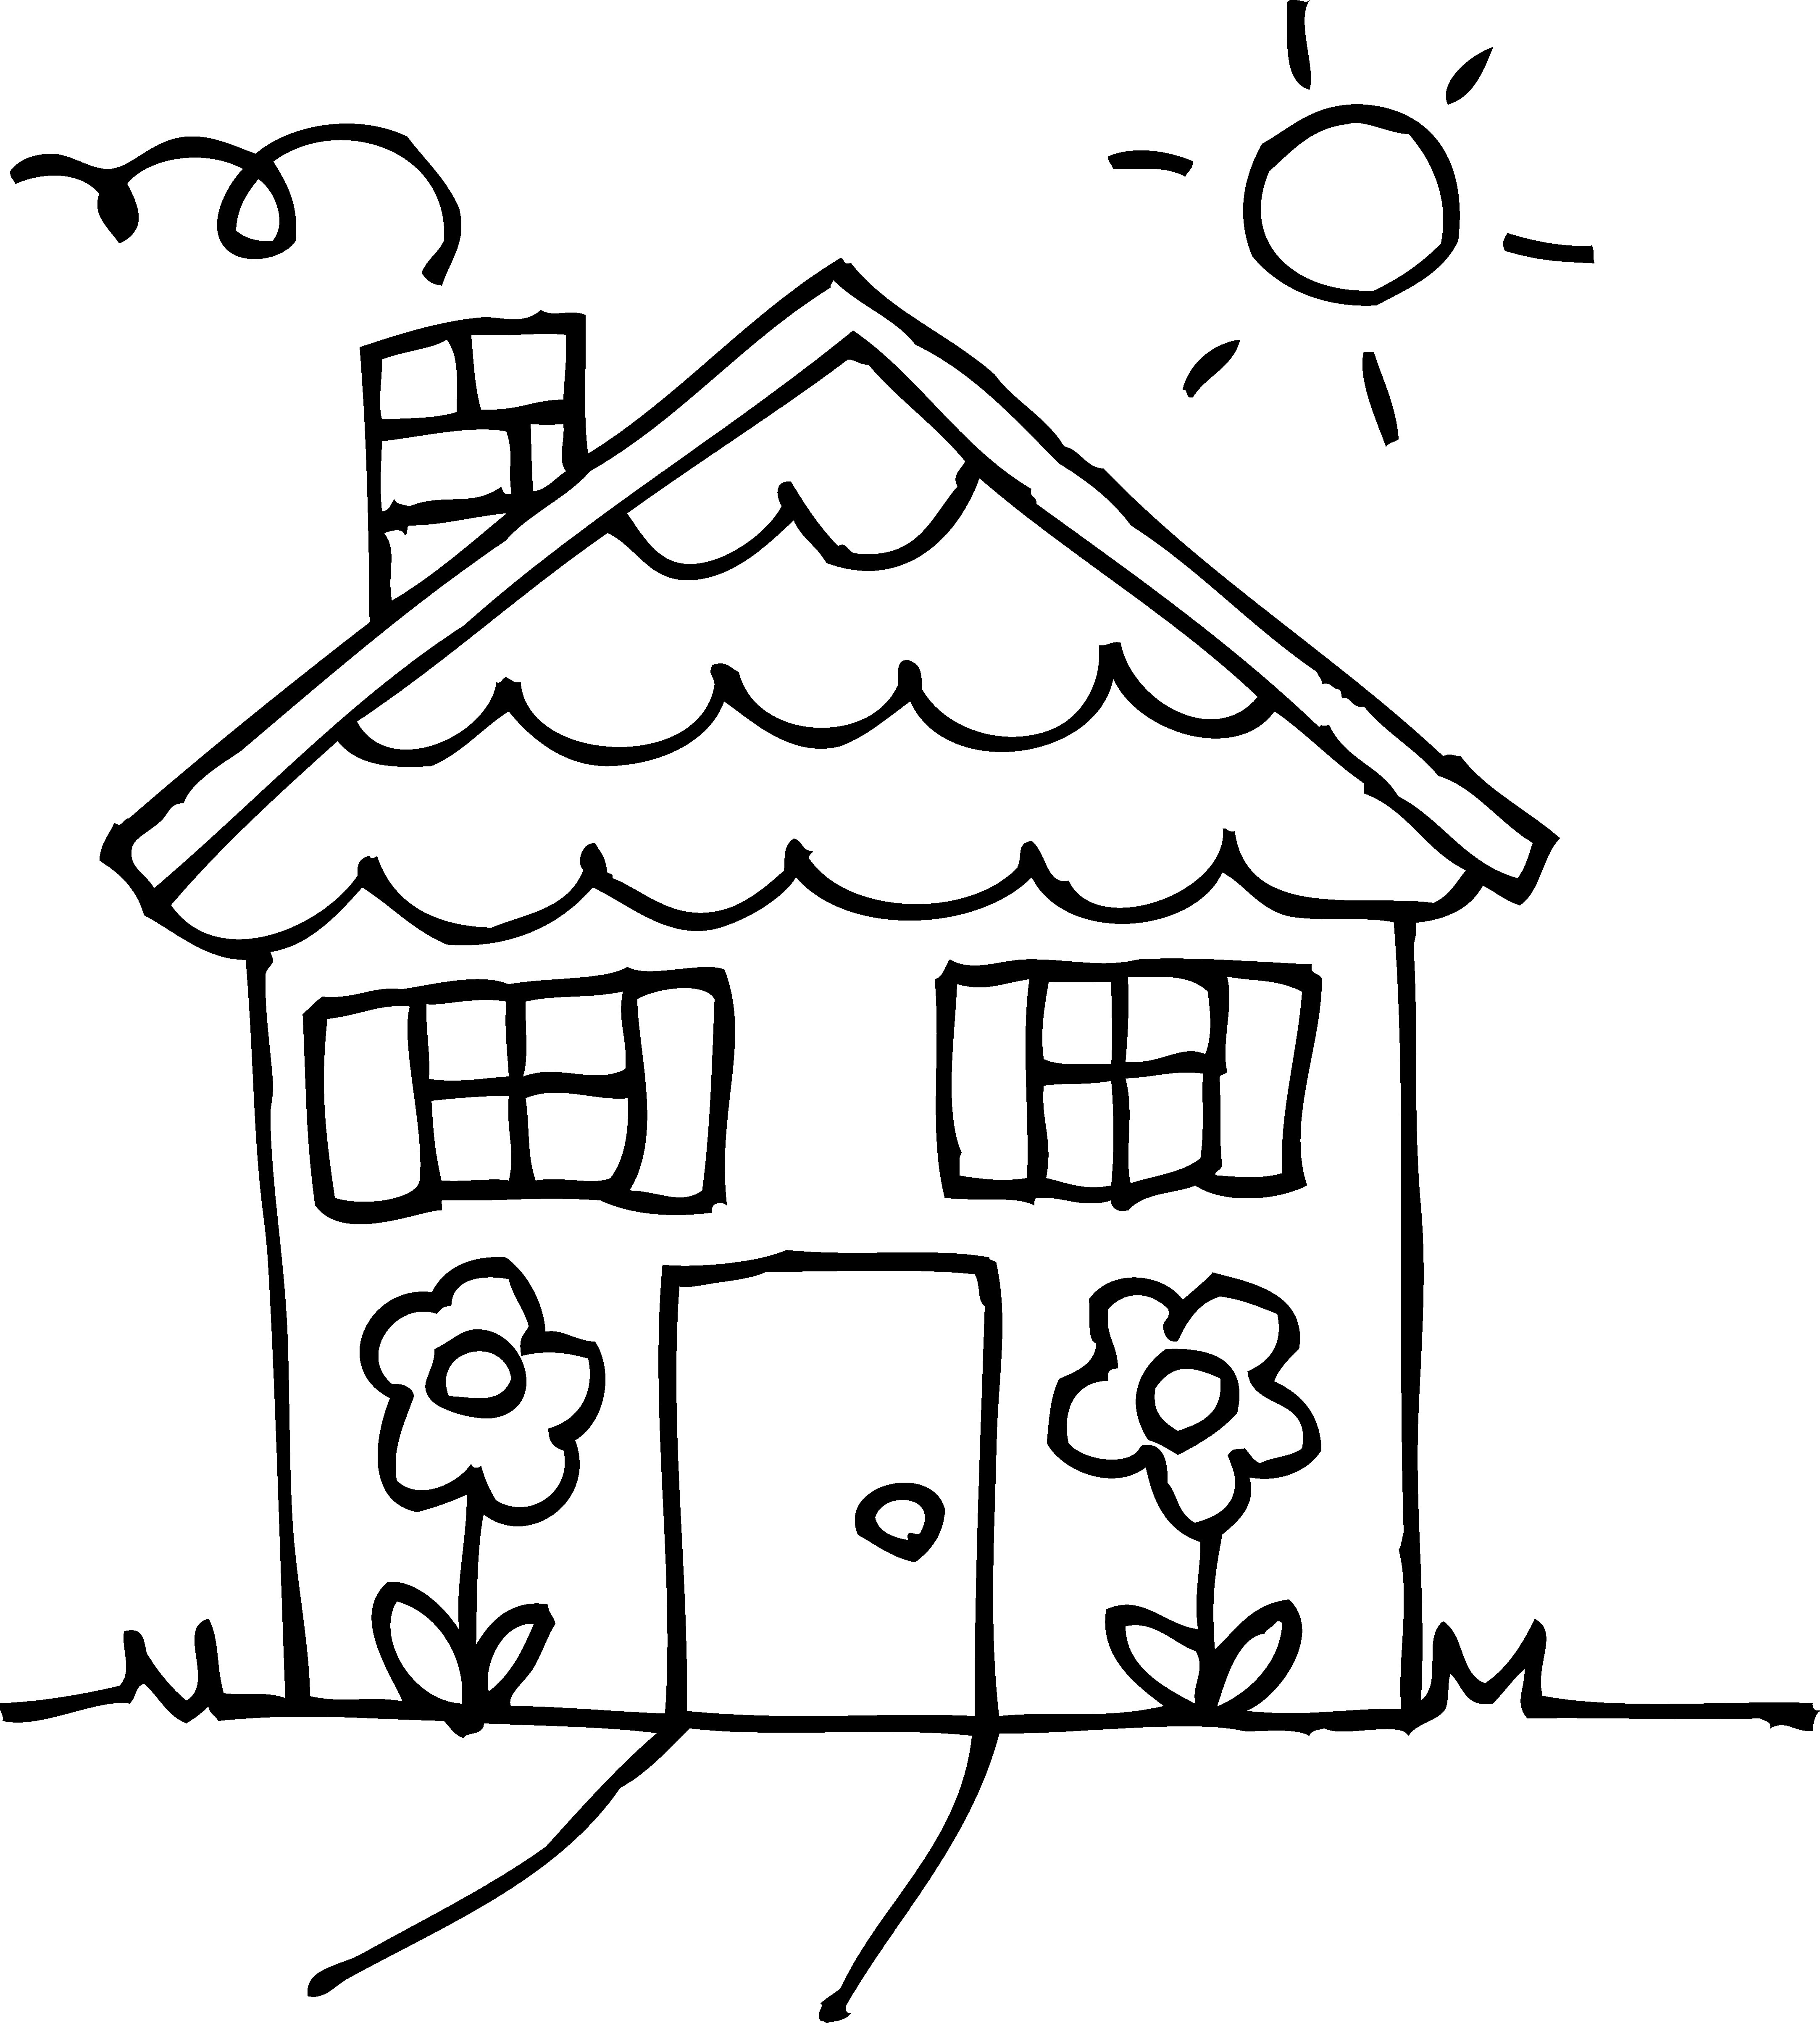 House Coloring Book
 Drawing clipart house Pencil and in color drawing